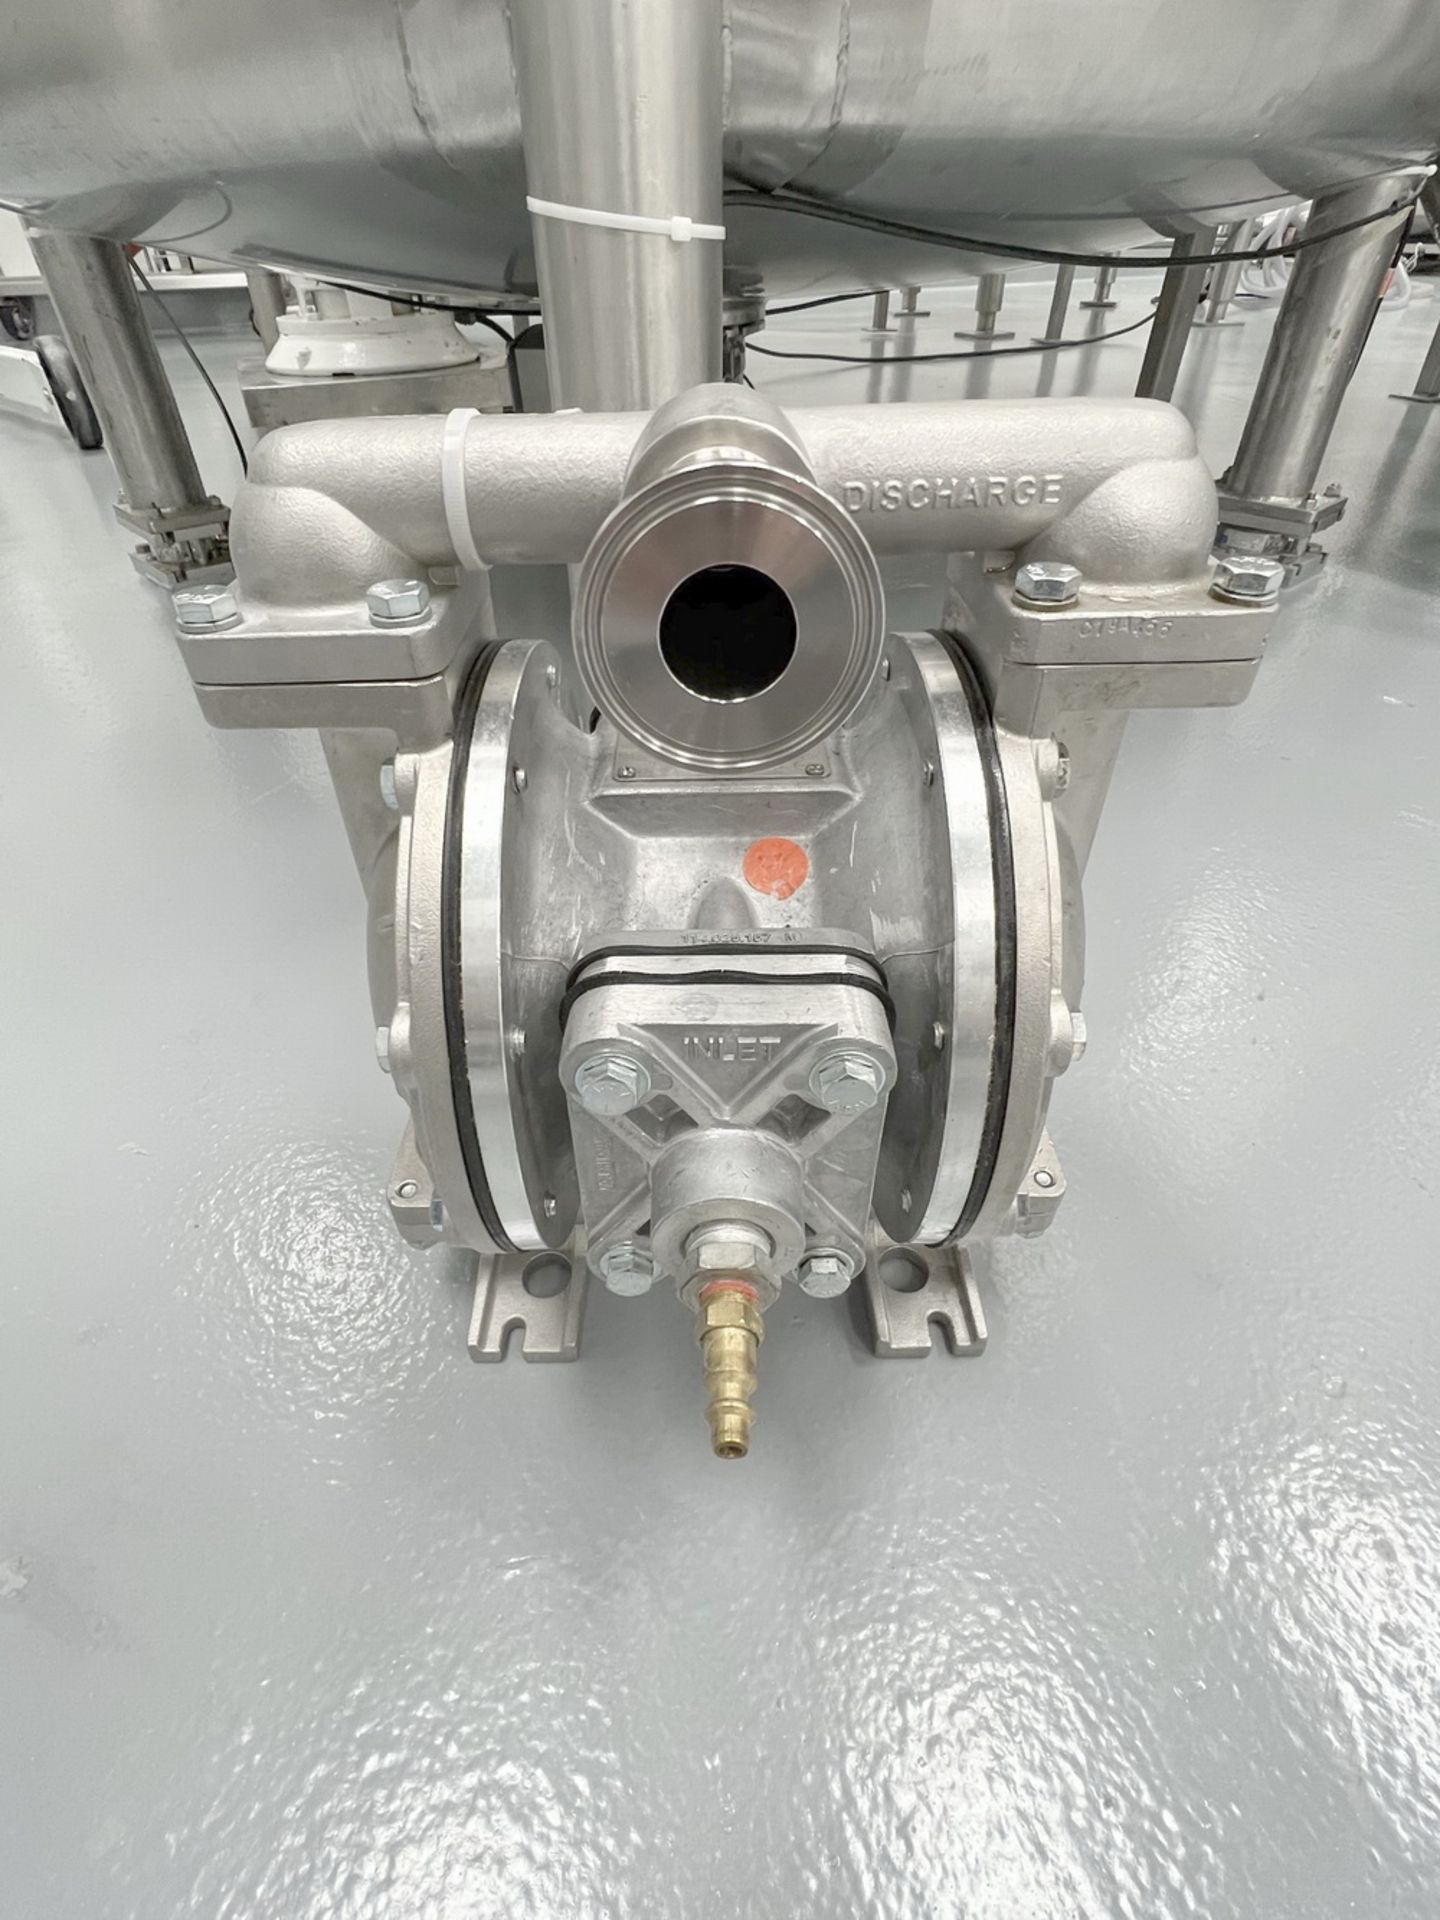 Sandpiper Stainless Steel Diaphragm Pump - Image 2 of 3